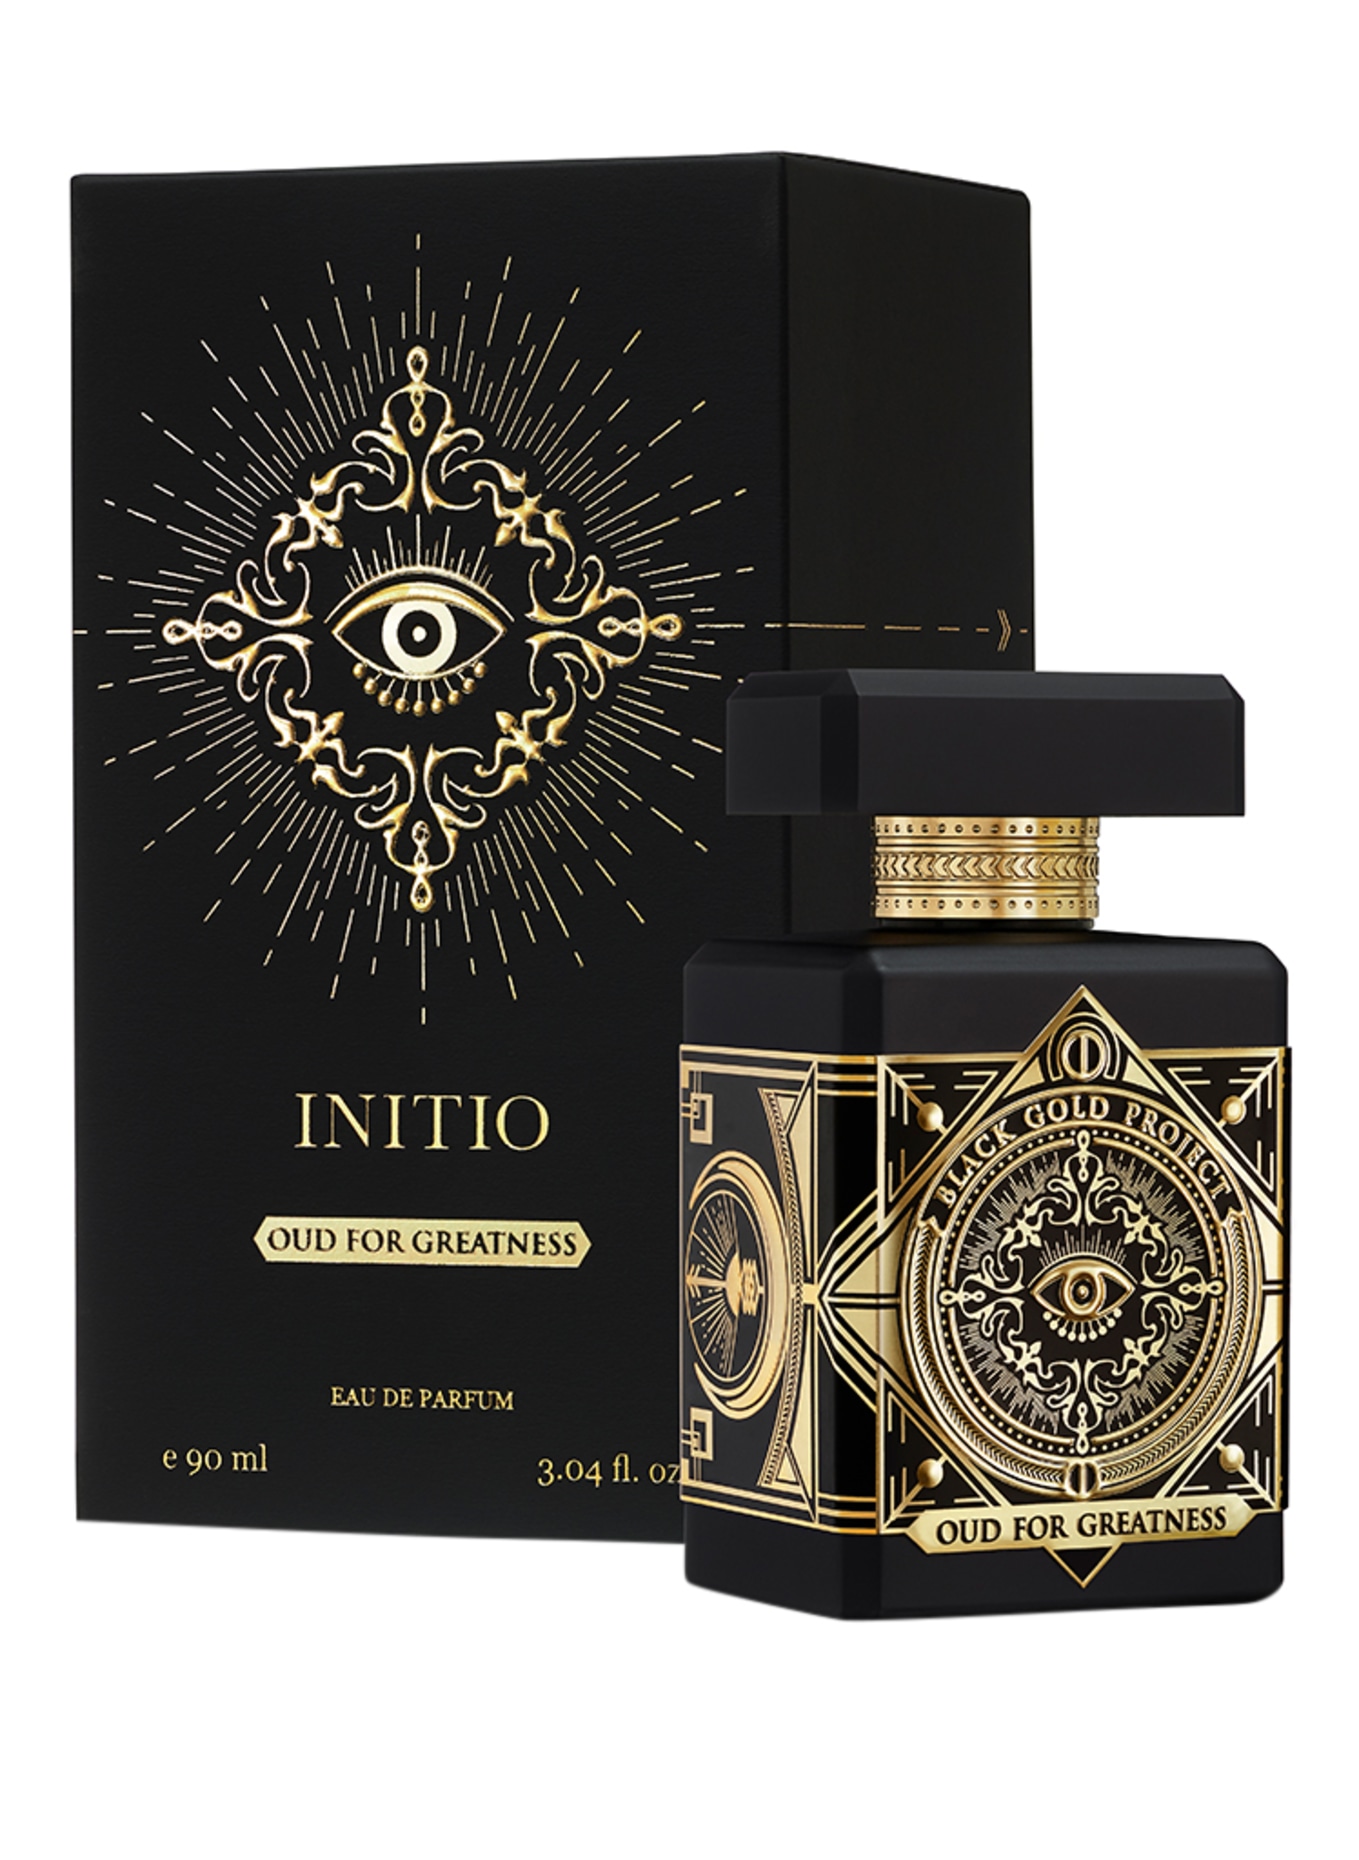 Initio OUD FOR GREATNESS (Obrazek 2)